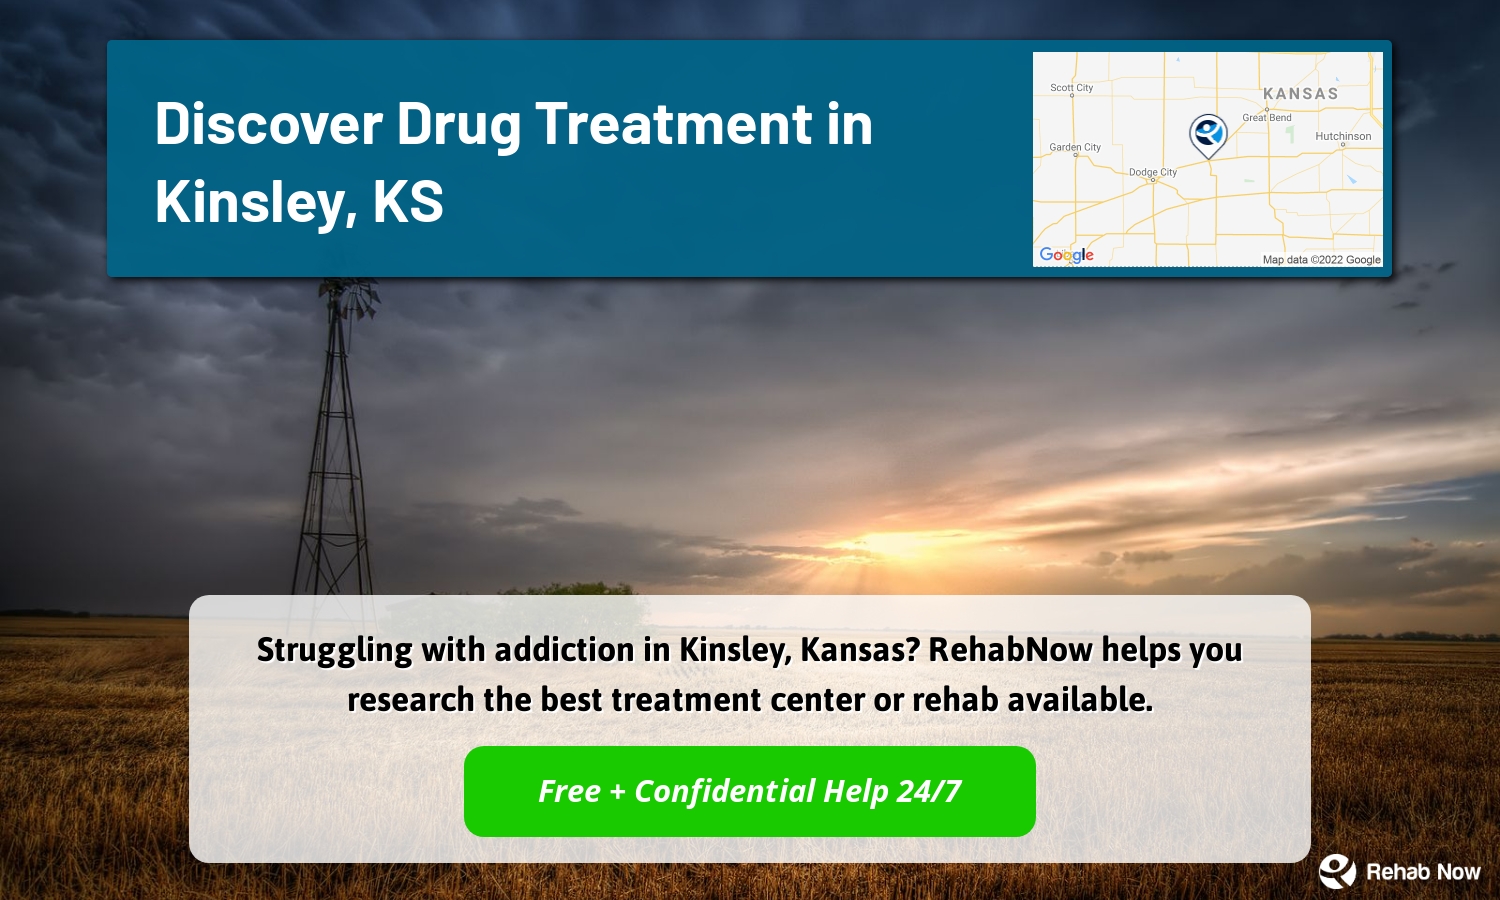 Struggling with addiction in Kinsley, Kansas? RehabNow helps you research the best treatment center or rehab available.